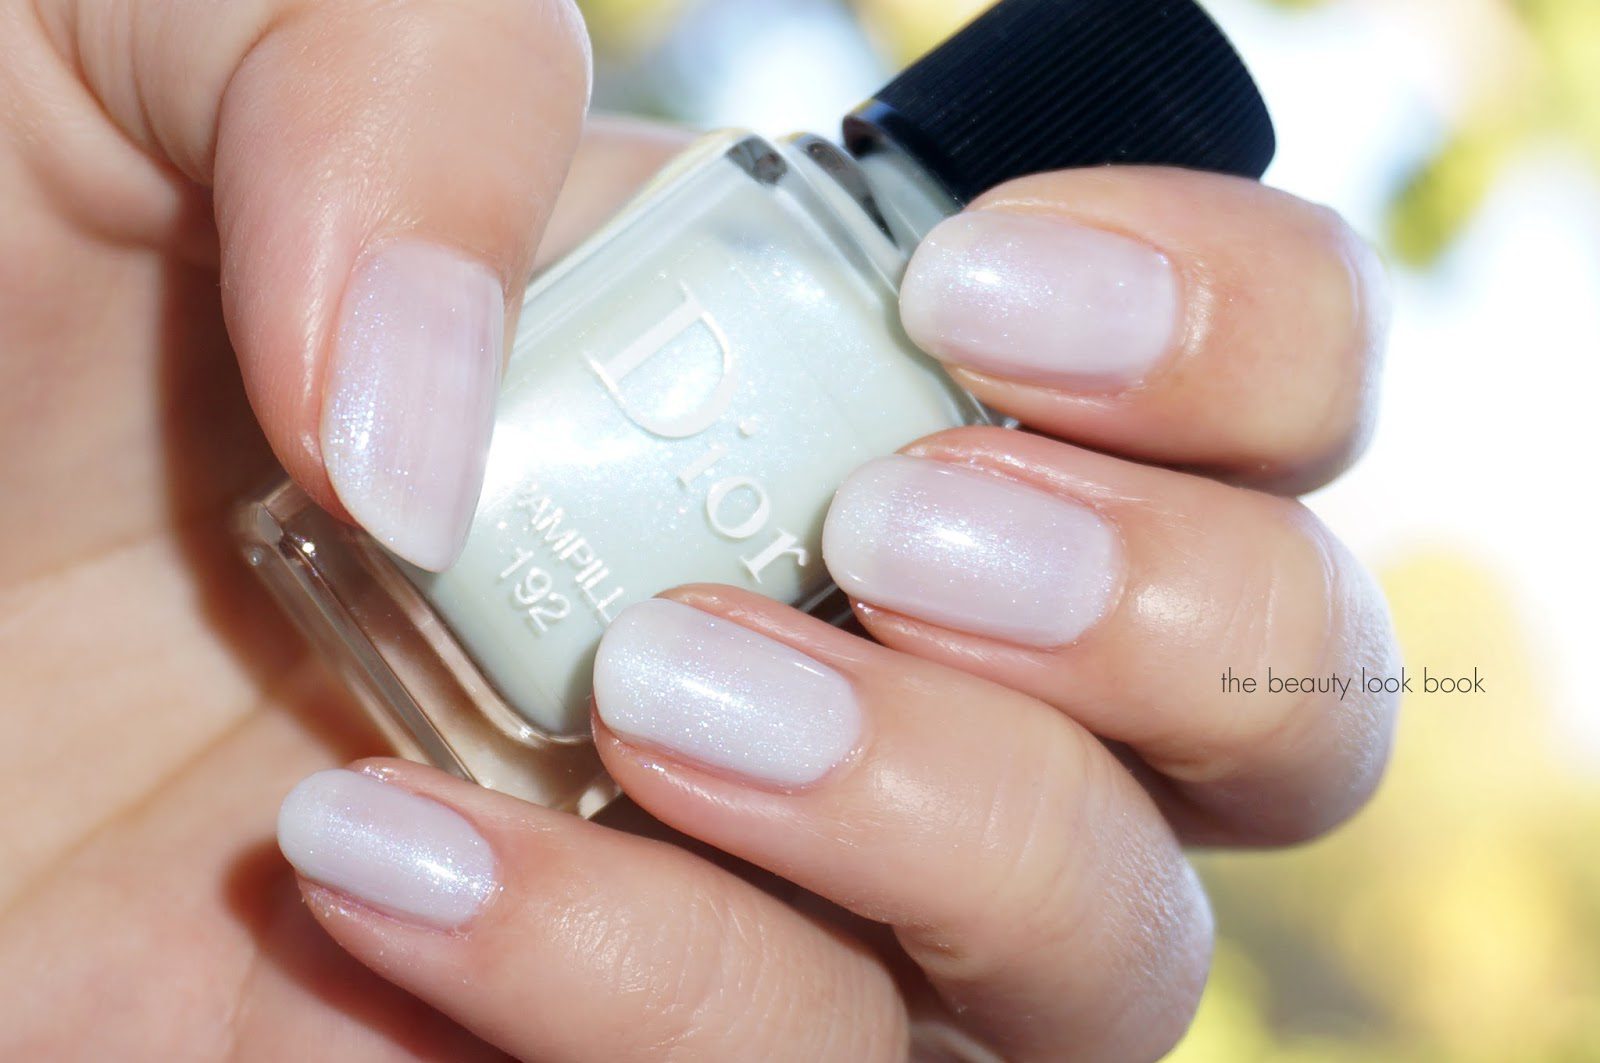 Dior Perle Trianon Review & Cloudy Ombre Nails